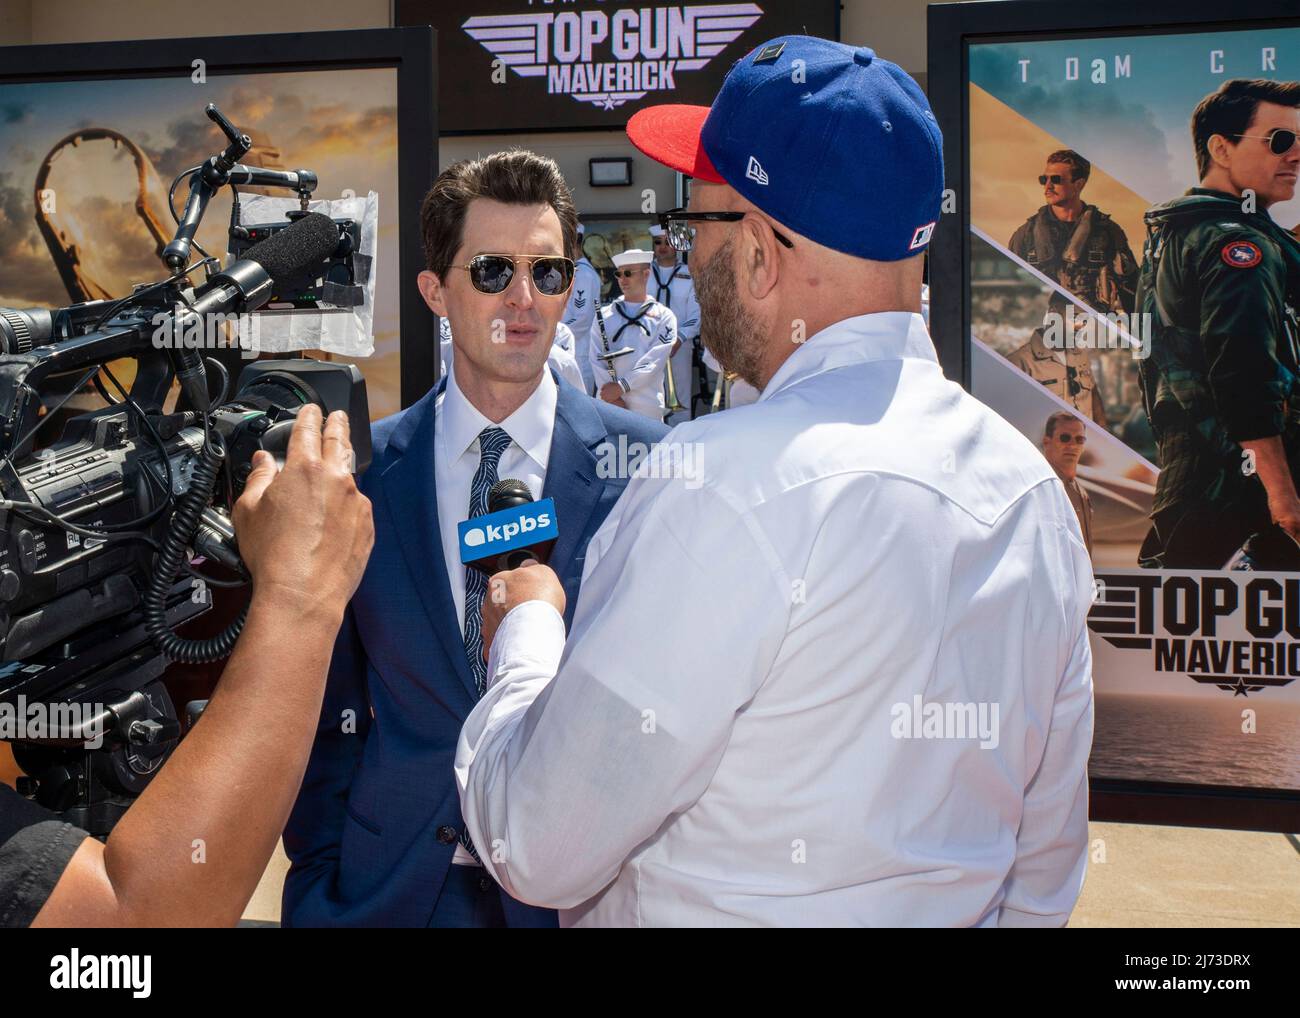 San Diego, United States. 04 May, 2022. Movie director Joe Kosinski, center, is interviewed on the red carpet during the advance movie premiere of Top Gun: Maverick, at Naval Air Station North Island, May 4, 2022 in San Diego, California, Top Gun: Maverick, is the sequel to the 1986 blockbuster, Top Gun and will be released worldwide on May 27.  Credit: MC2 Keenan Daniels/US Navy/Alamy Live News Stock Photo